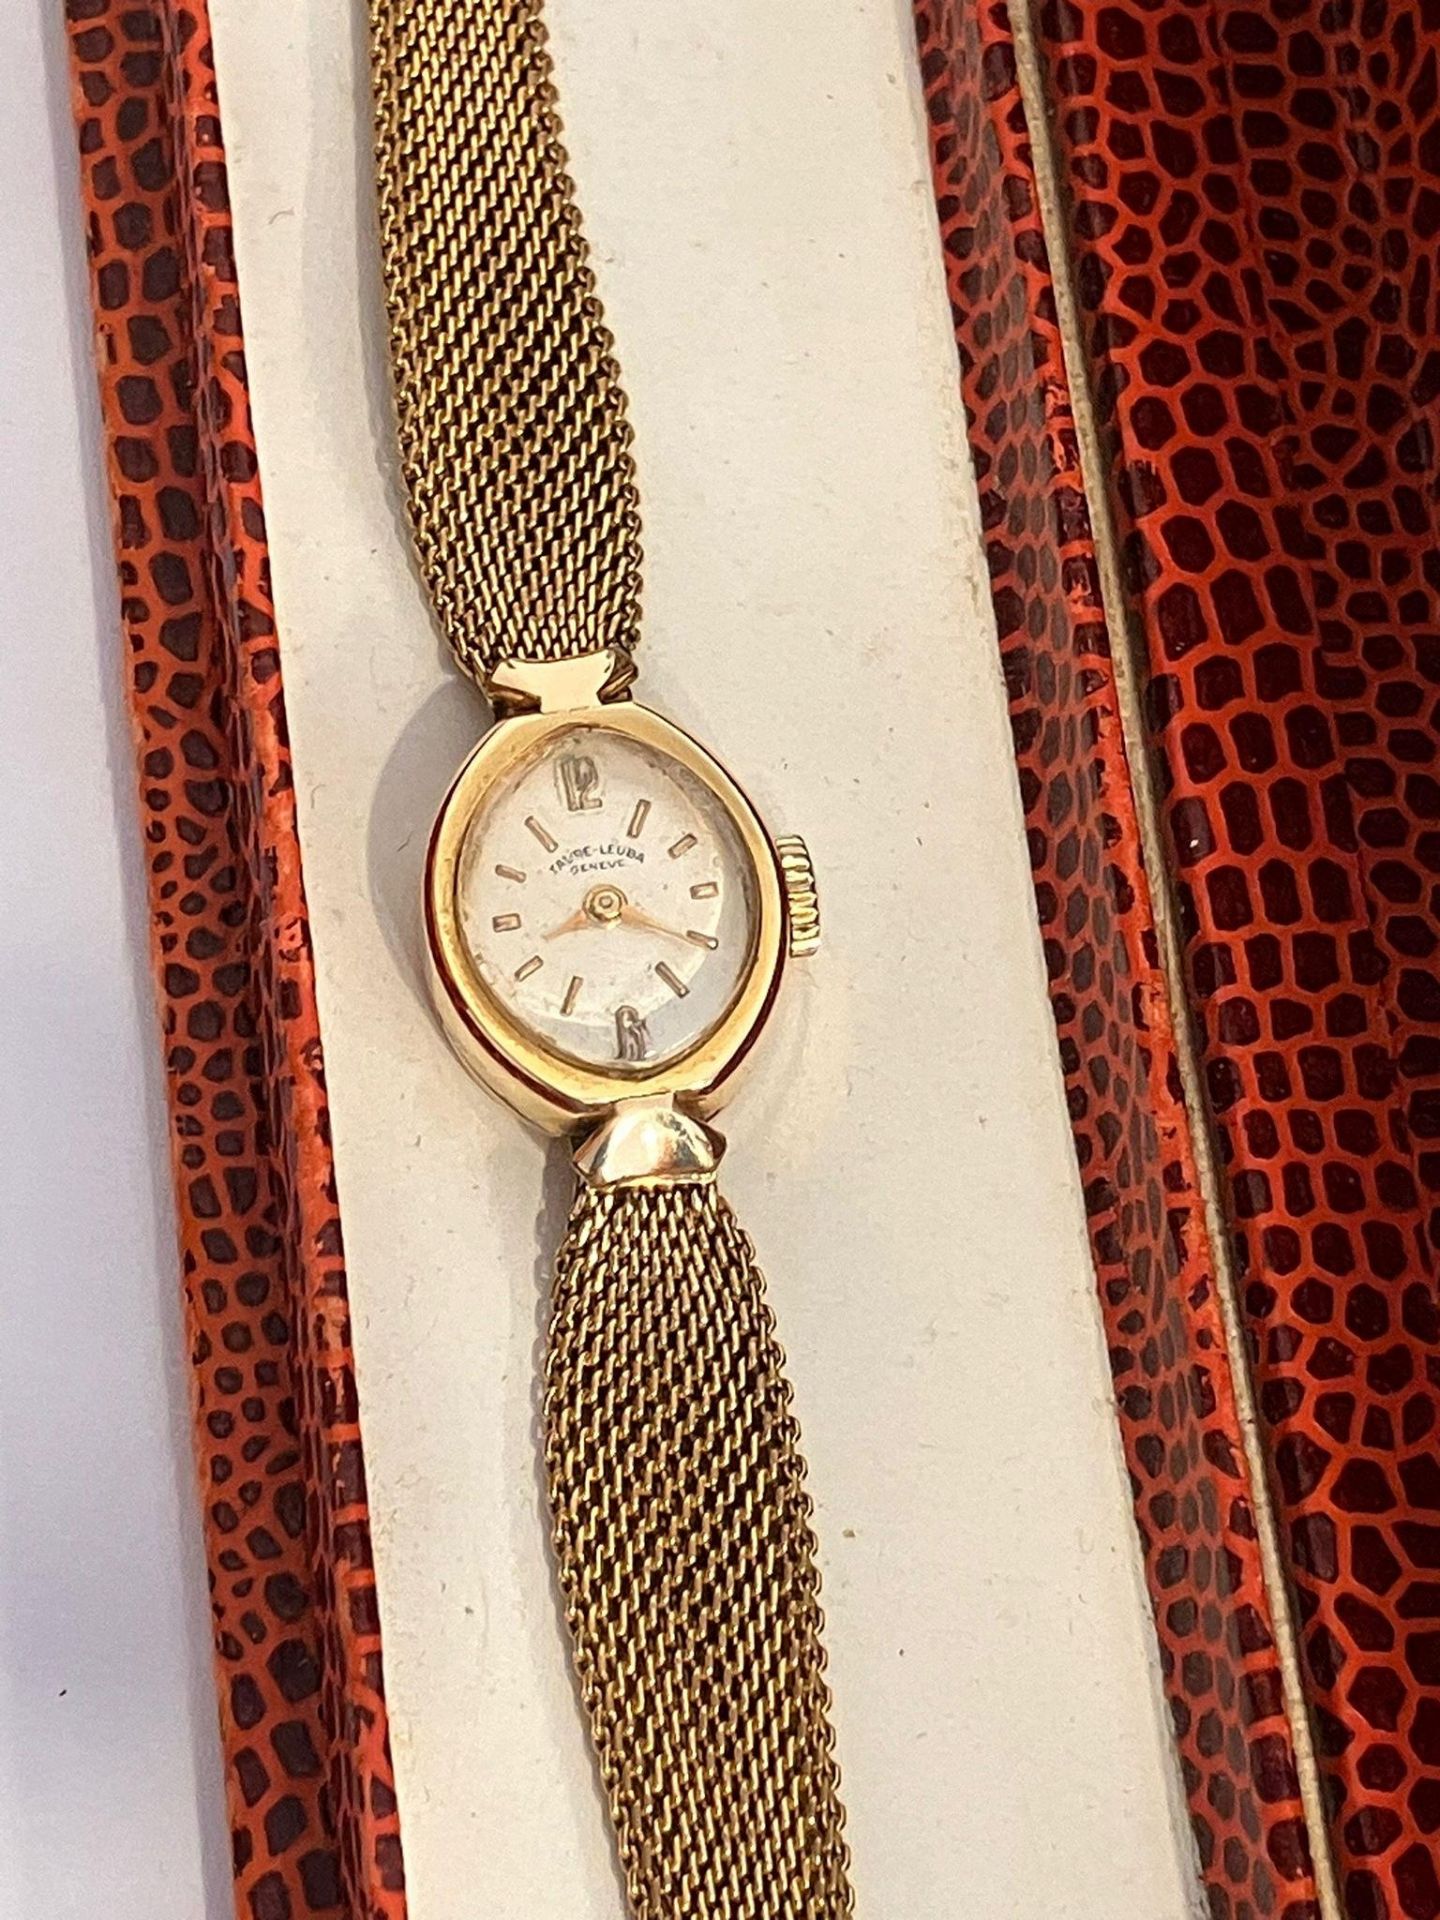 Ladies vintage FAVRE LEUBA ROLLED GOLD WRISTWATCH. Complete with original box and service receipts - Image 4 of 7